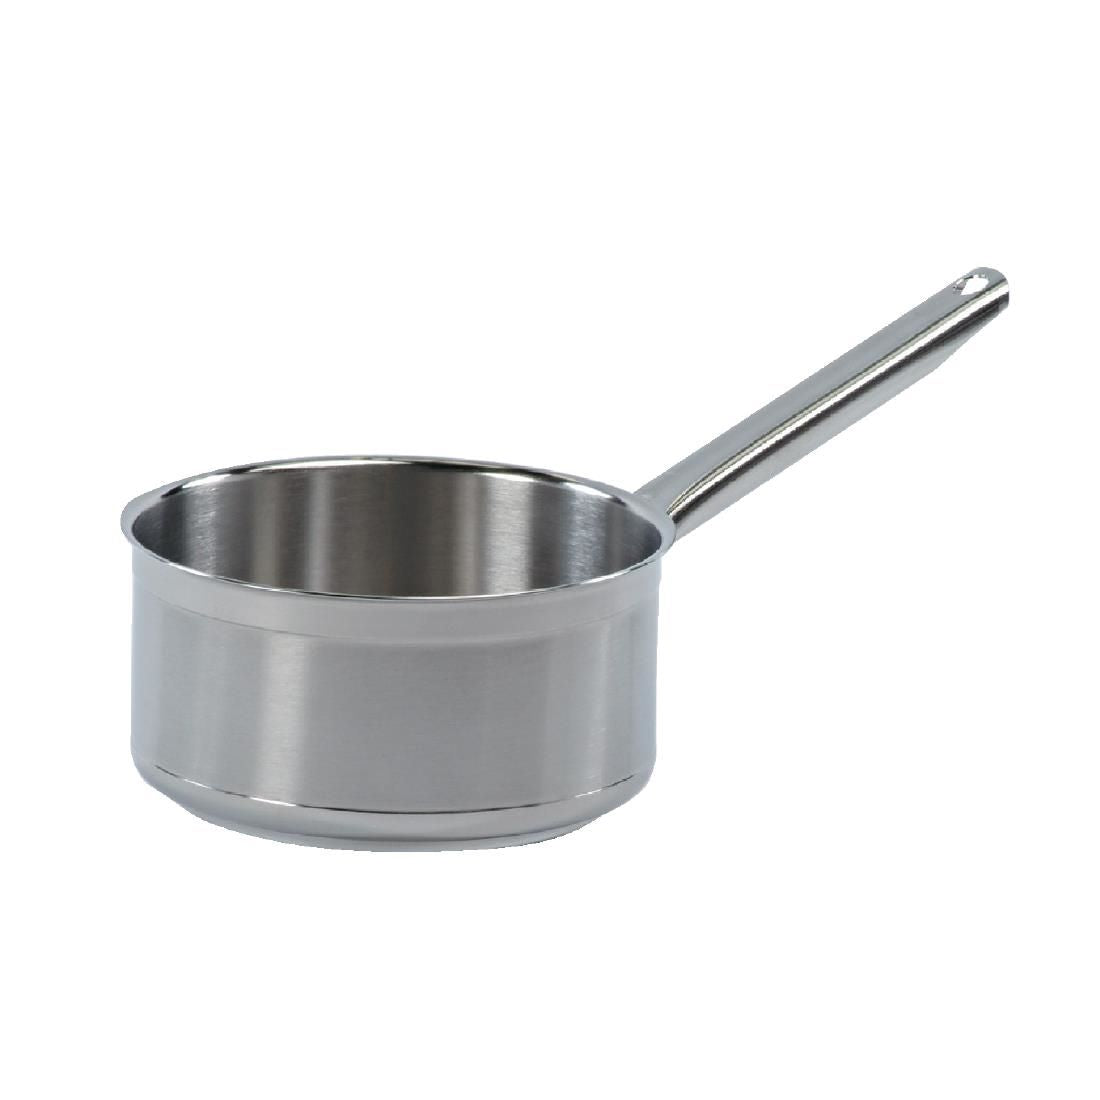 Bourgeat Tradition Plus Stainless Steel Saucepan 1.7Ltr JD Catering Equipment Solutions Ltd